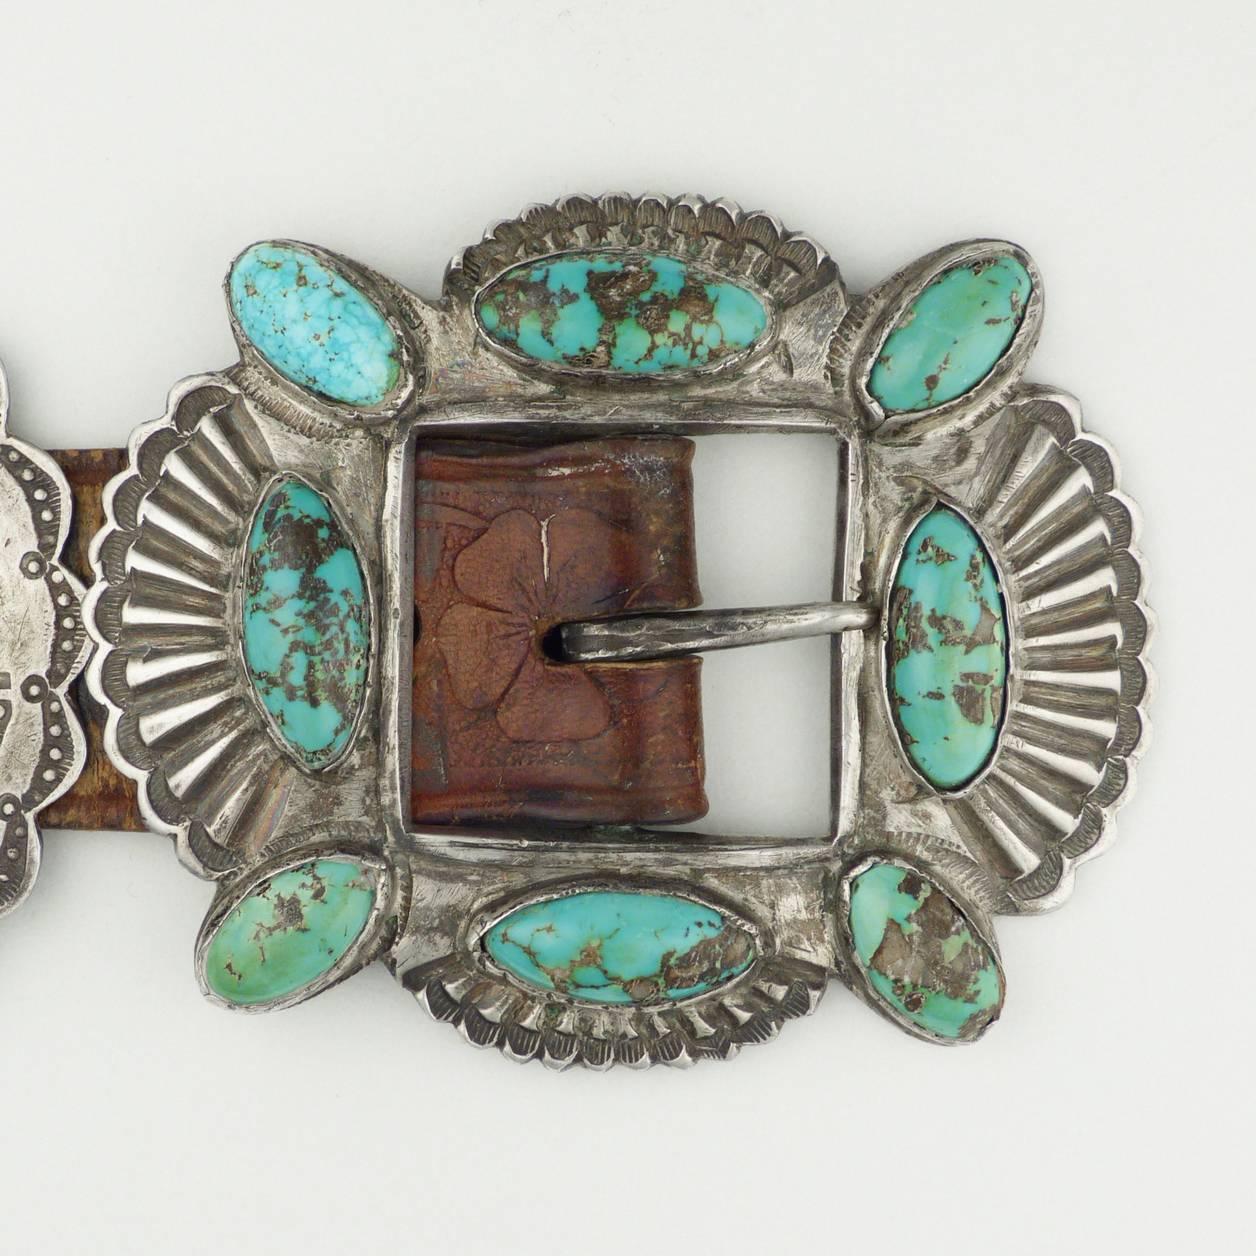 This is a vintage Navajo Concho belt dating to the early 1940s. It is set with 21 bezels of natural American turquoise. It measures 42.5